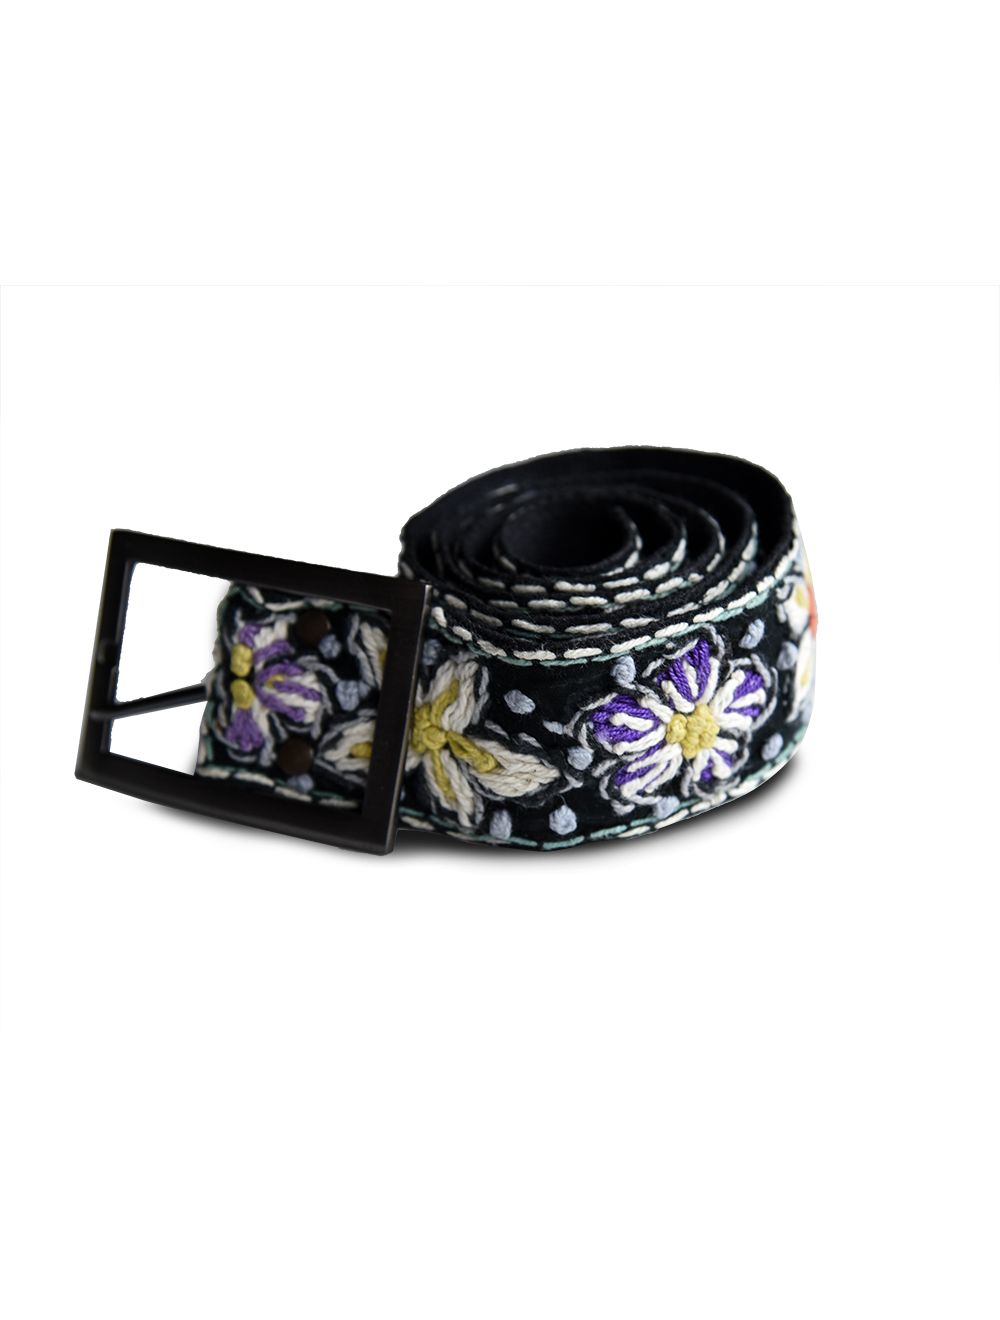 Yellowstone National Park Lodges Black  White Floral Belt - The only  official in park lodging